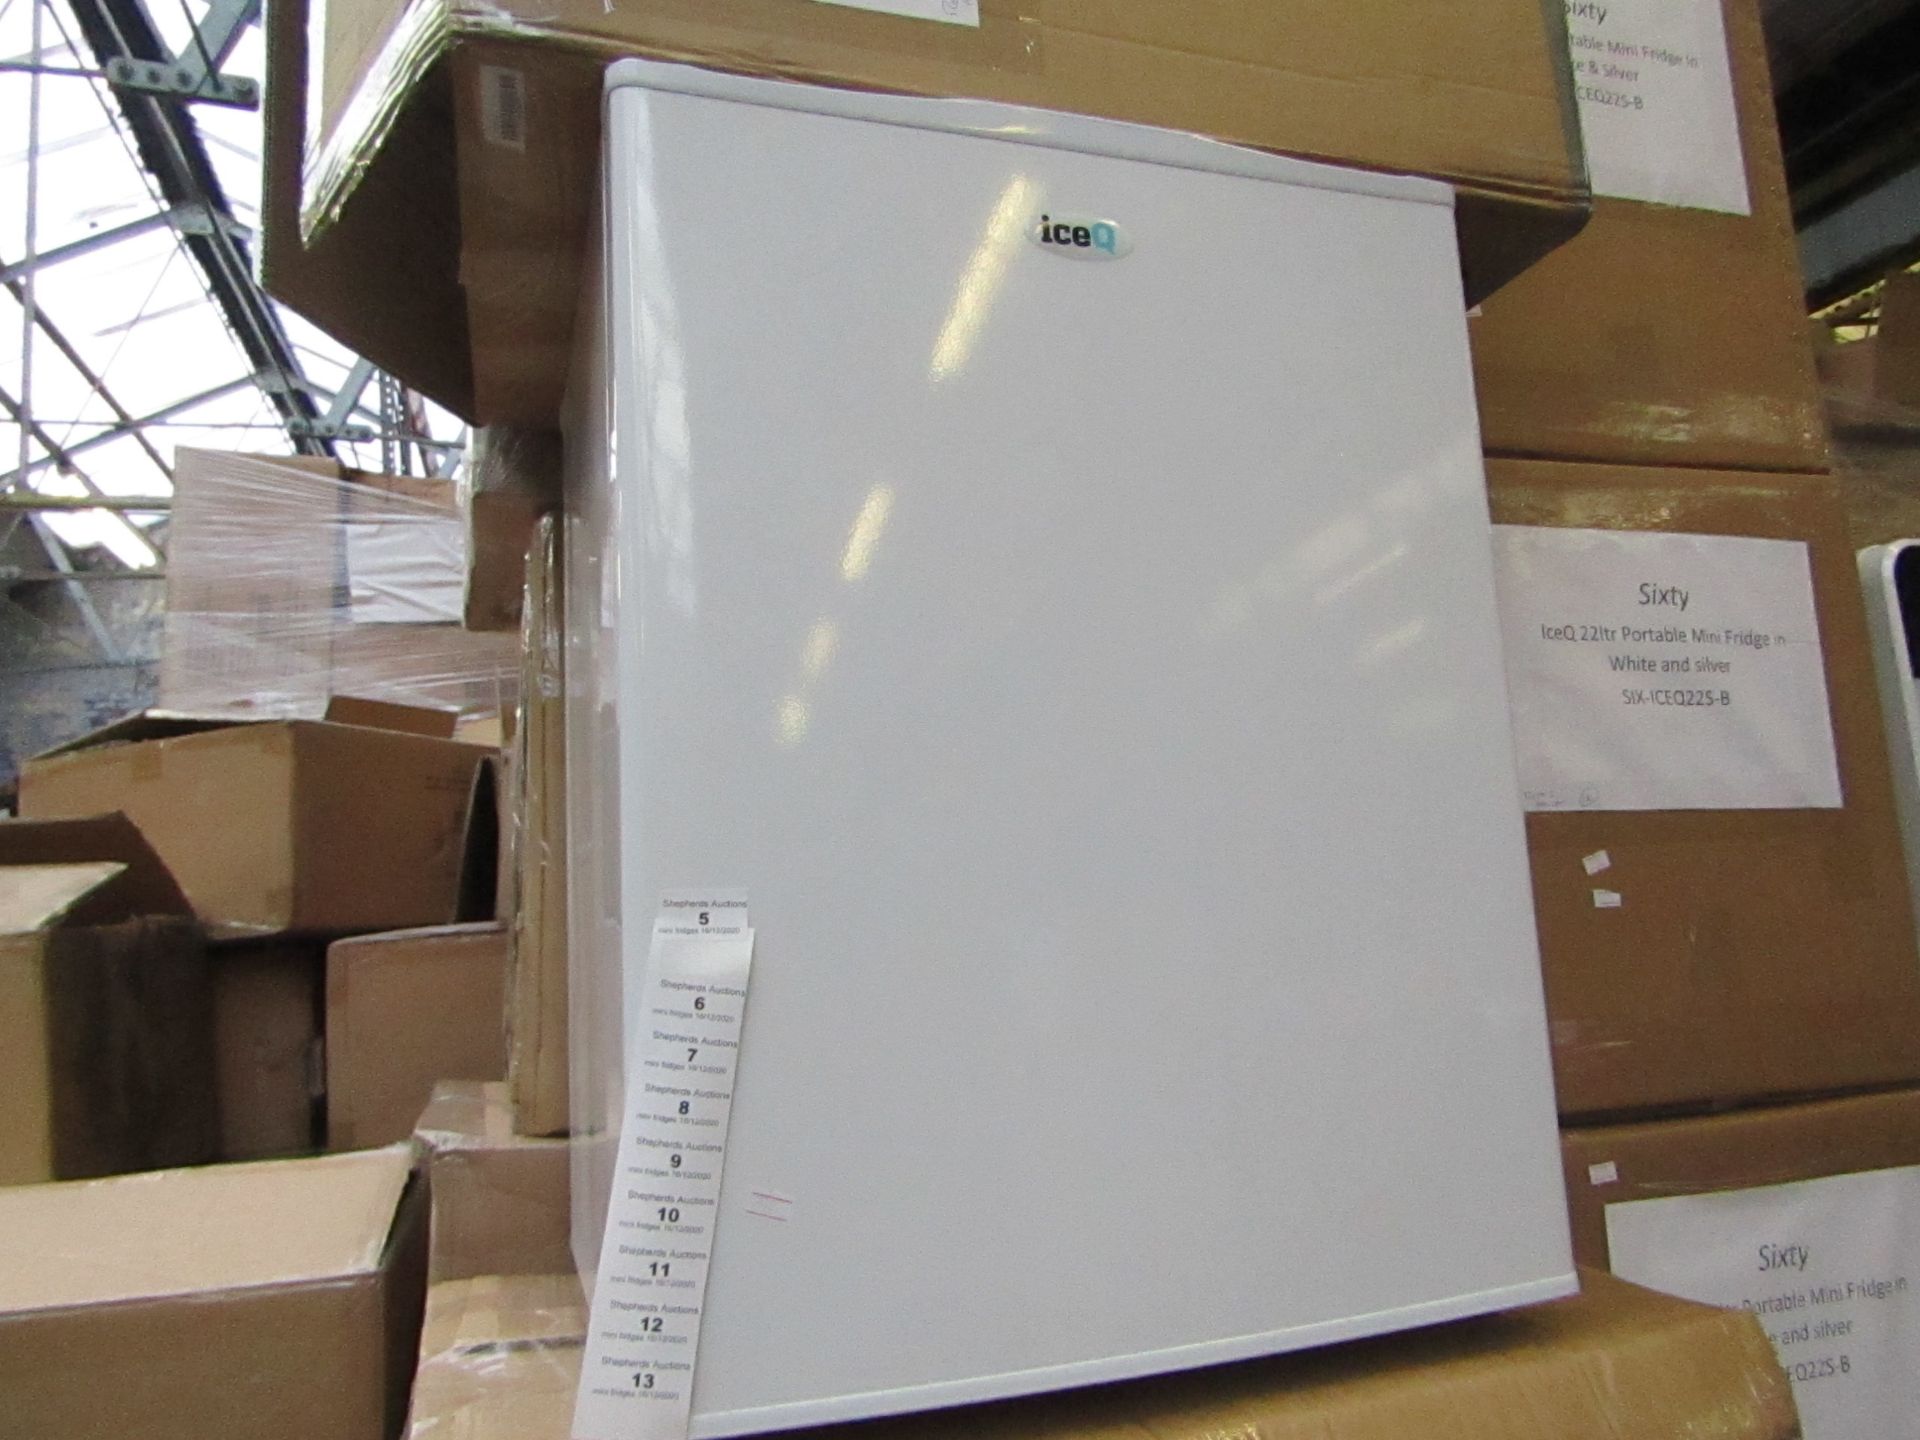 SIXTY IceQ 70ltr Table Top Fridge in White, Refurbished RRP £119.99